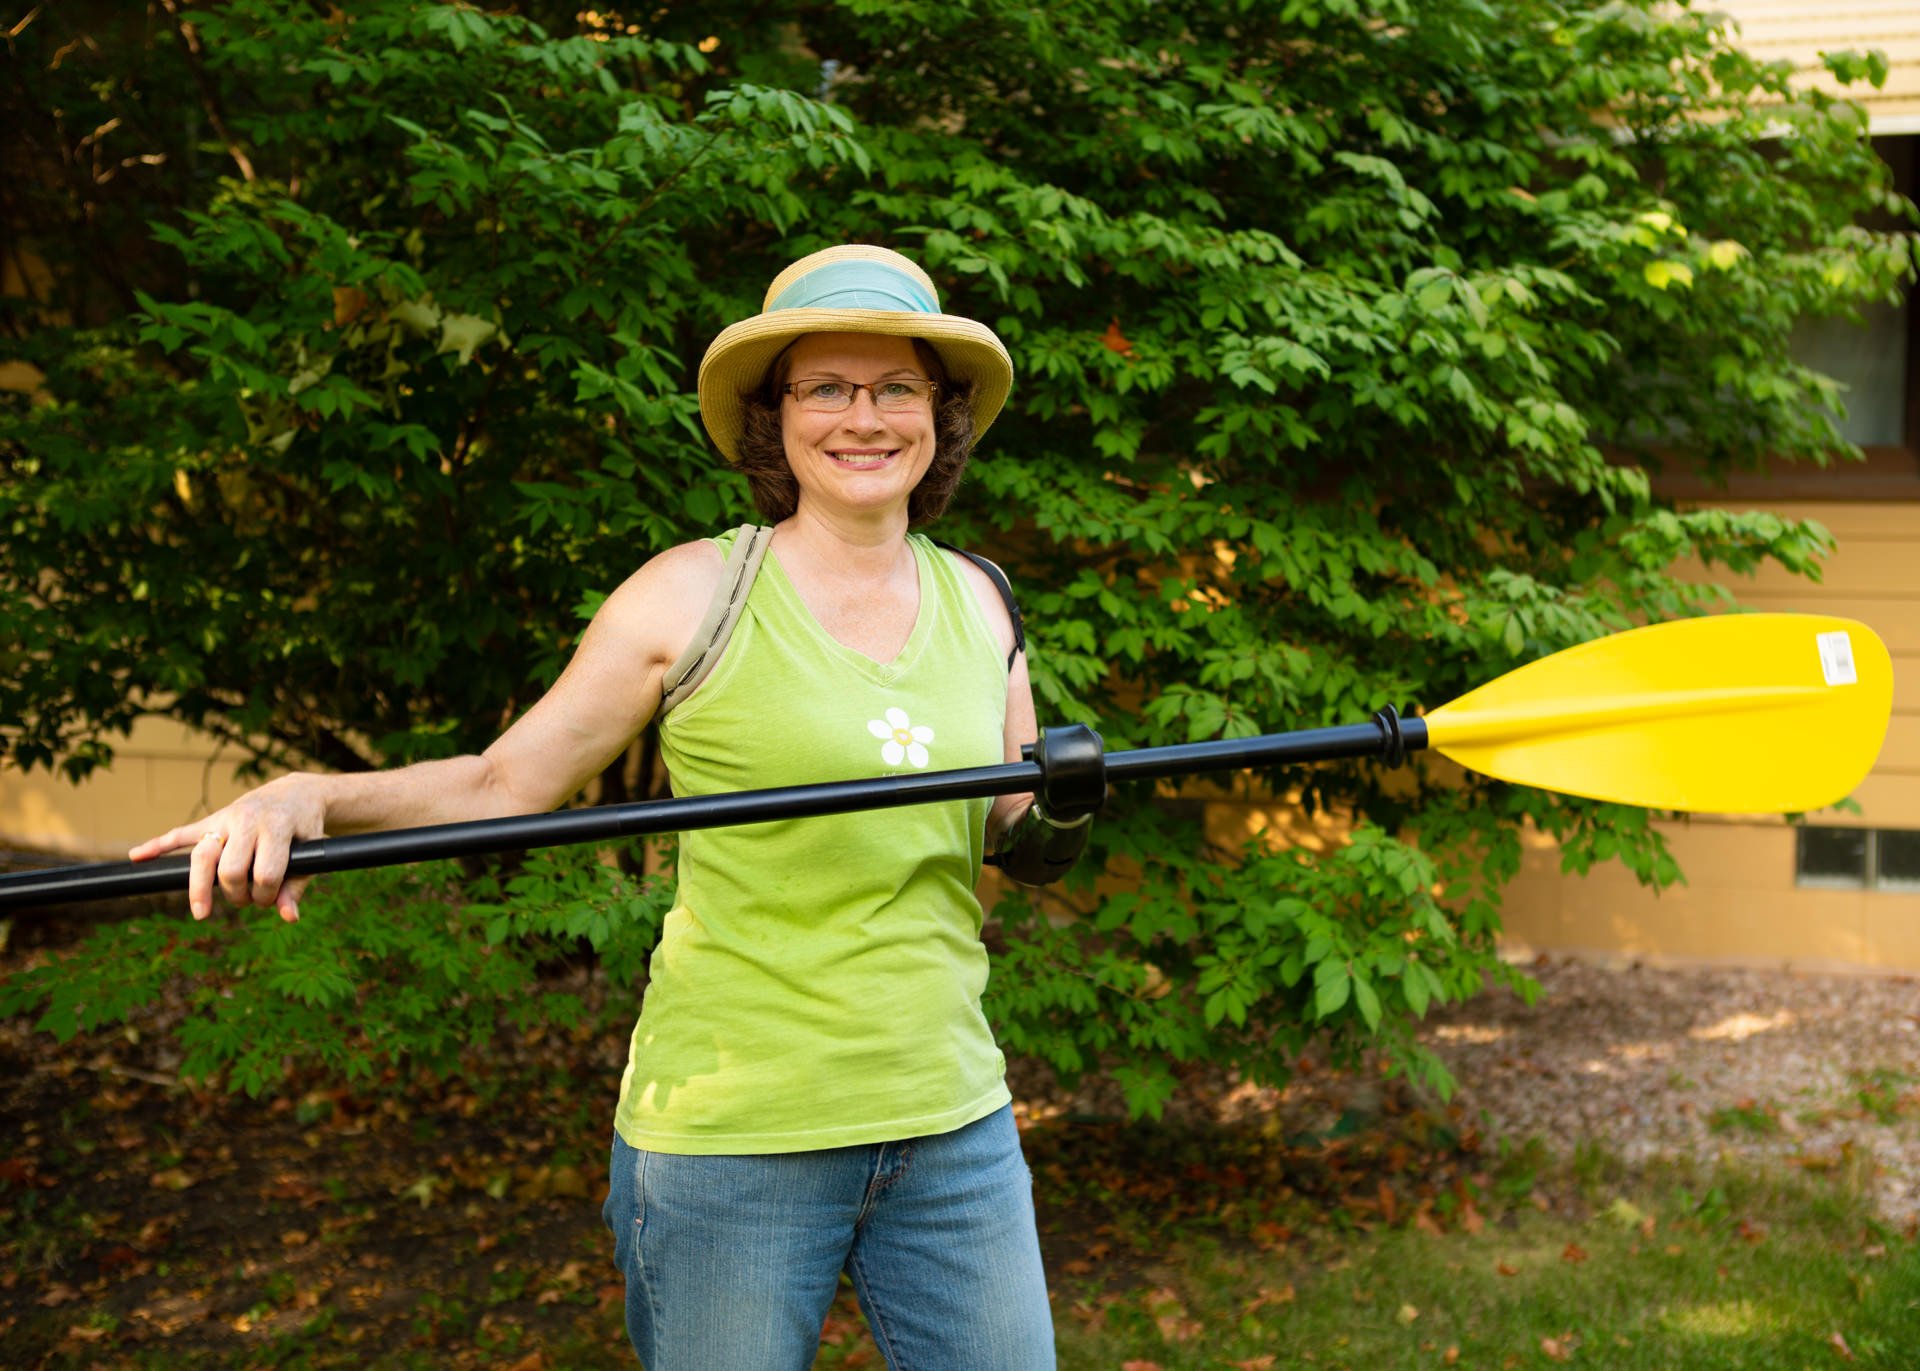 A transradial patient uses her activity-specific prosthesis for paddling a boat or canoe.